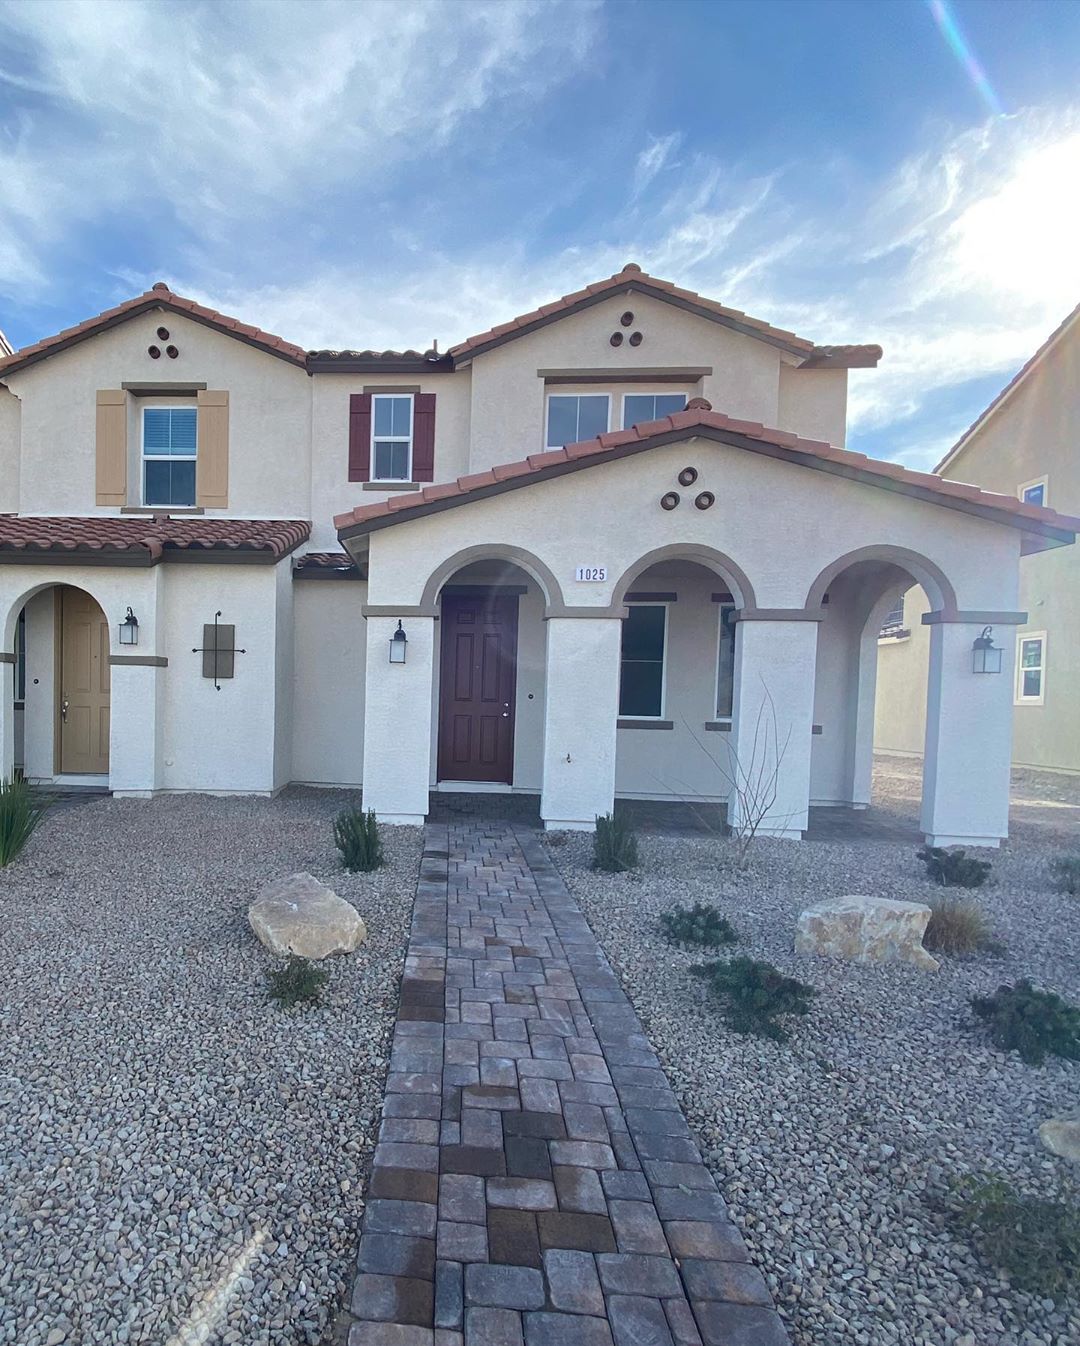 townhomes with Spanish style roof in Tule Springs, Las Vegas photo by Instagram user @kwsn_propertymanagement